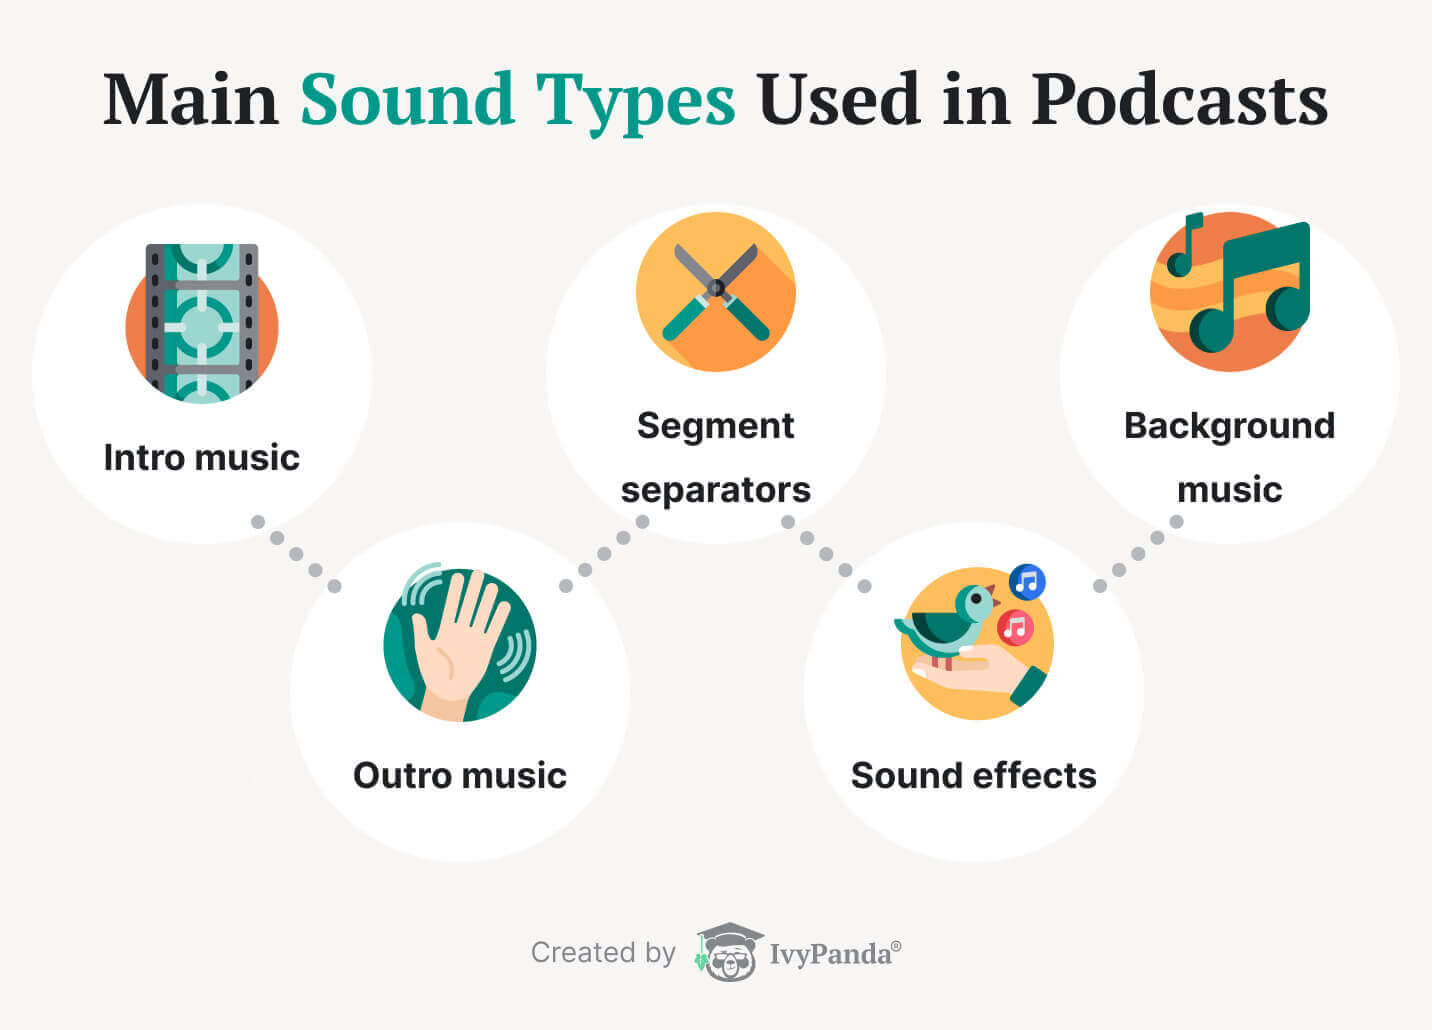 The picture enumerates the main sound types used in podcasts.